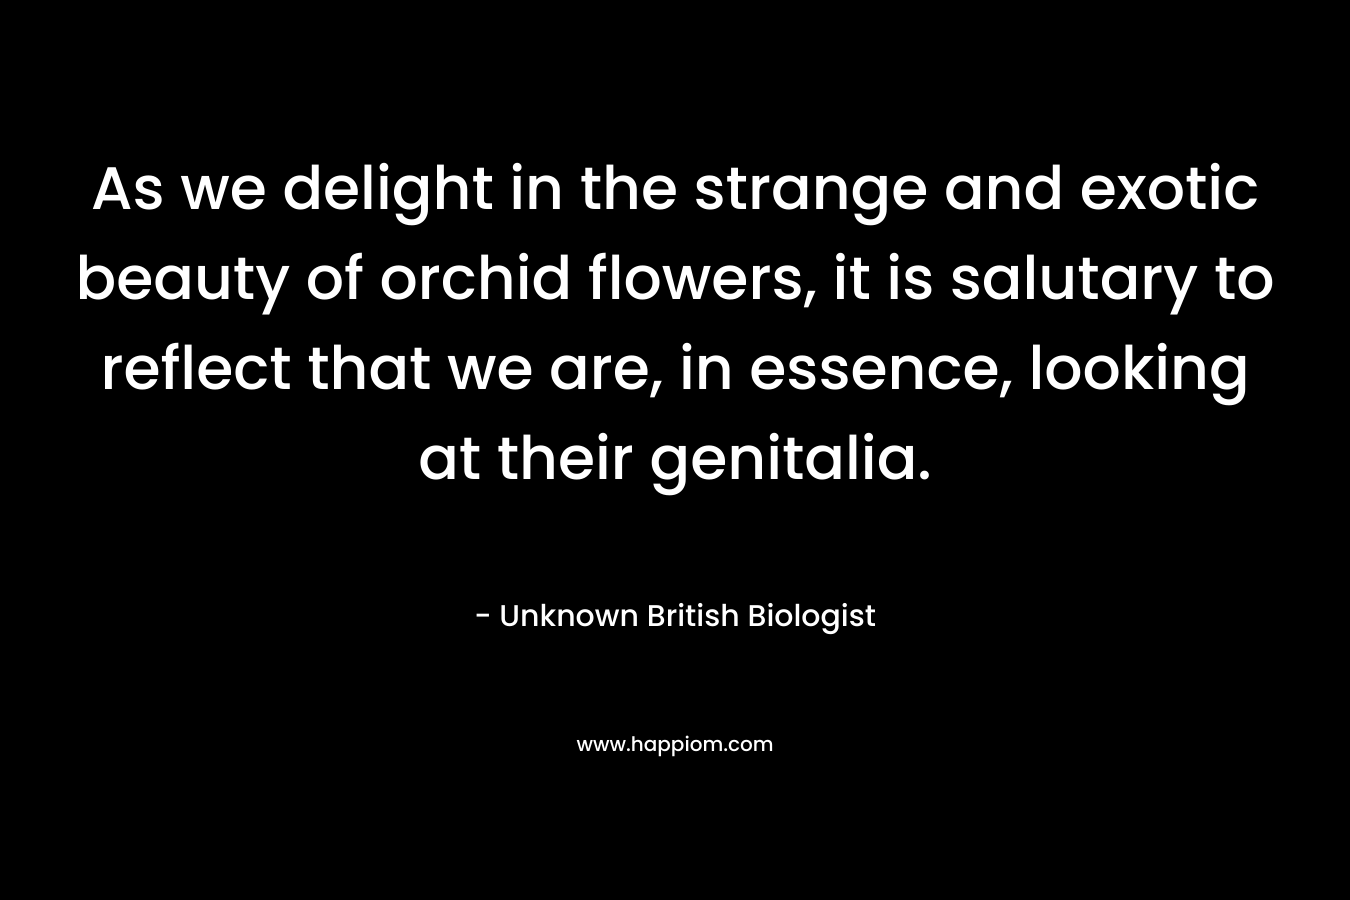 As we delight in the strange and exotic beauty of orchid flowers, it is salutary to reflect that we are, in essence, looking at their genitalia.